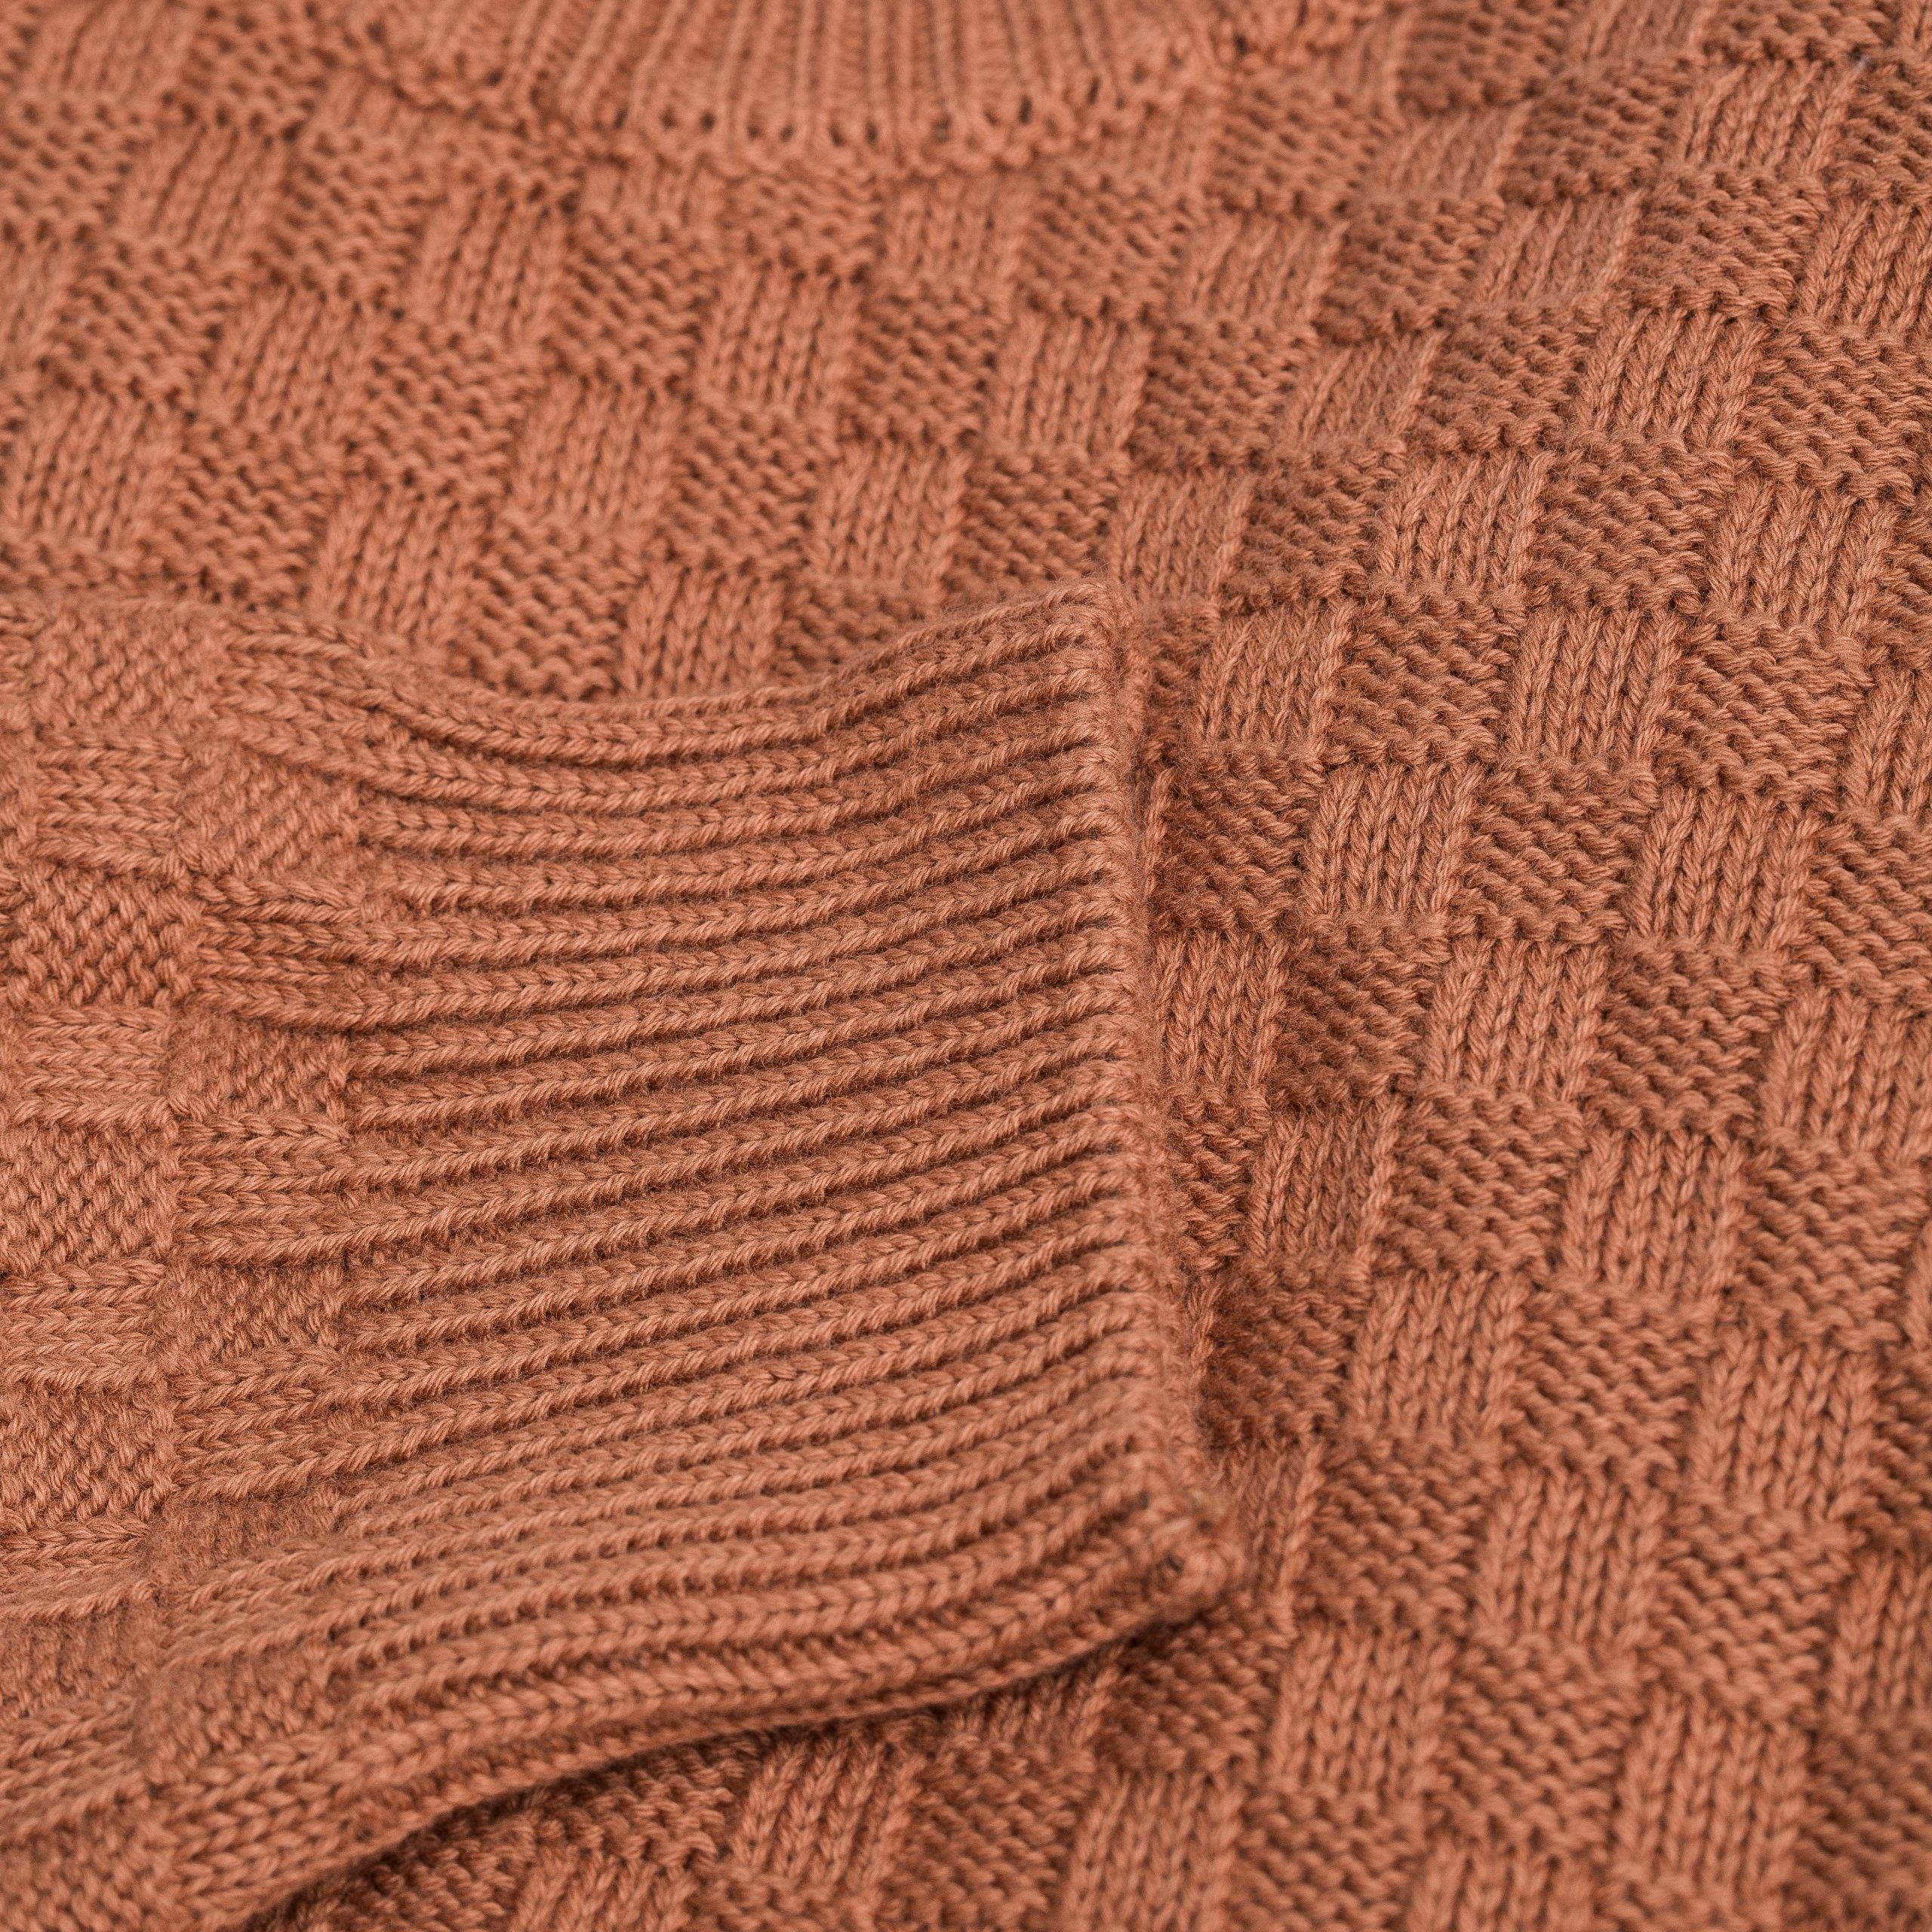 Knitted Sweater - Copper